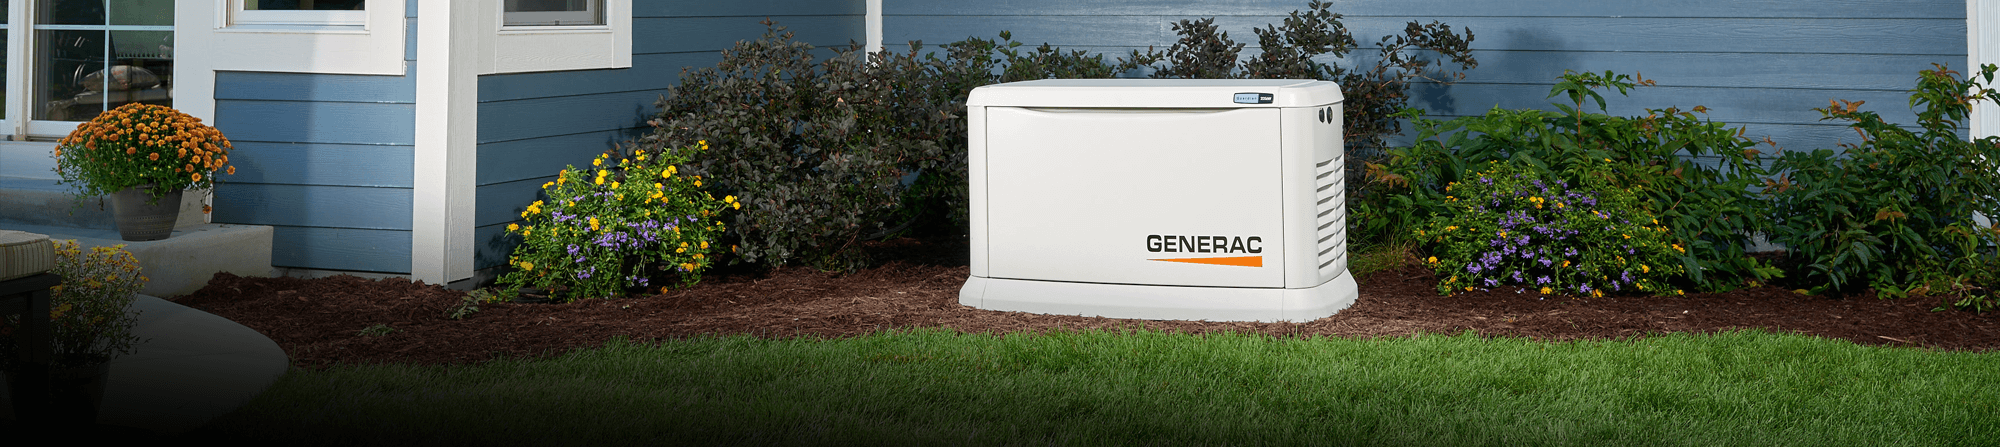 Up to 15% generator installation in Mequon, Wisconsin